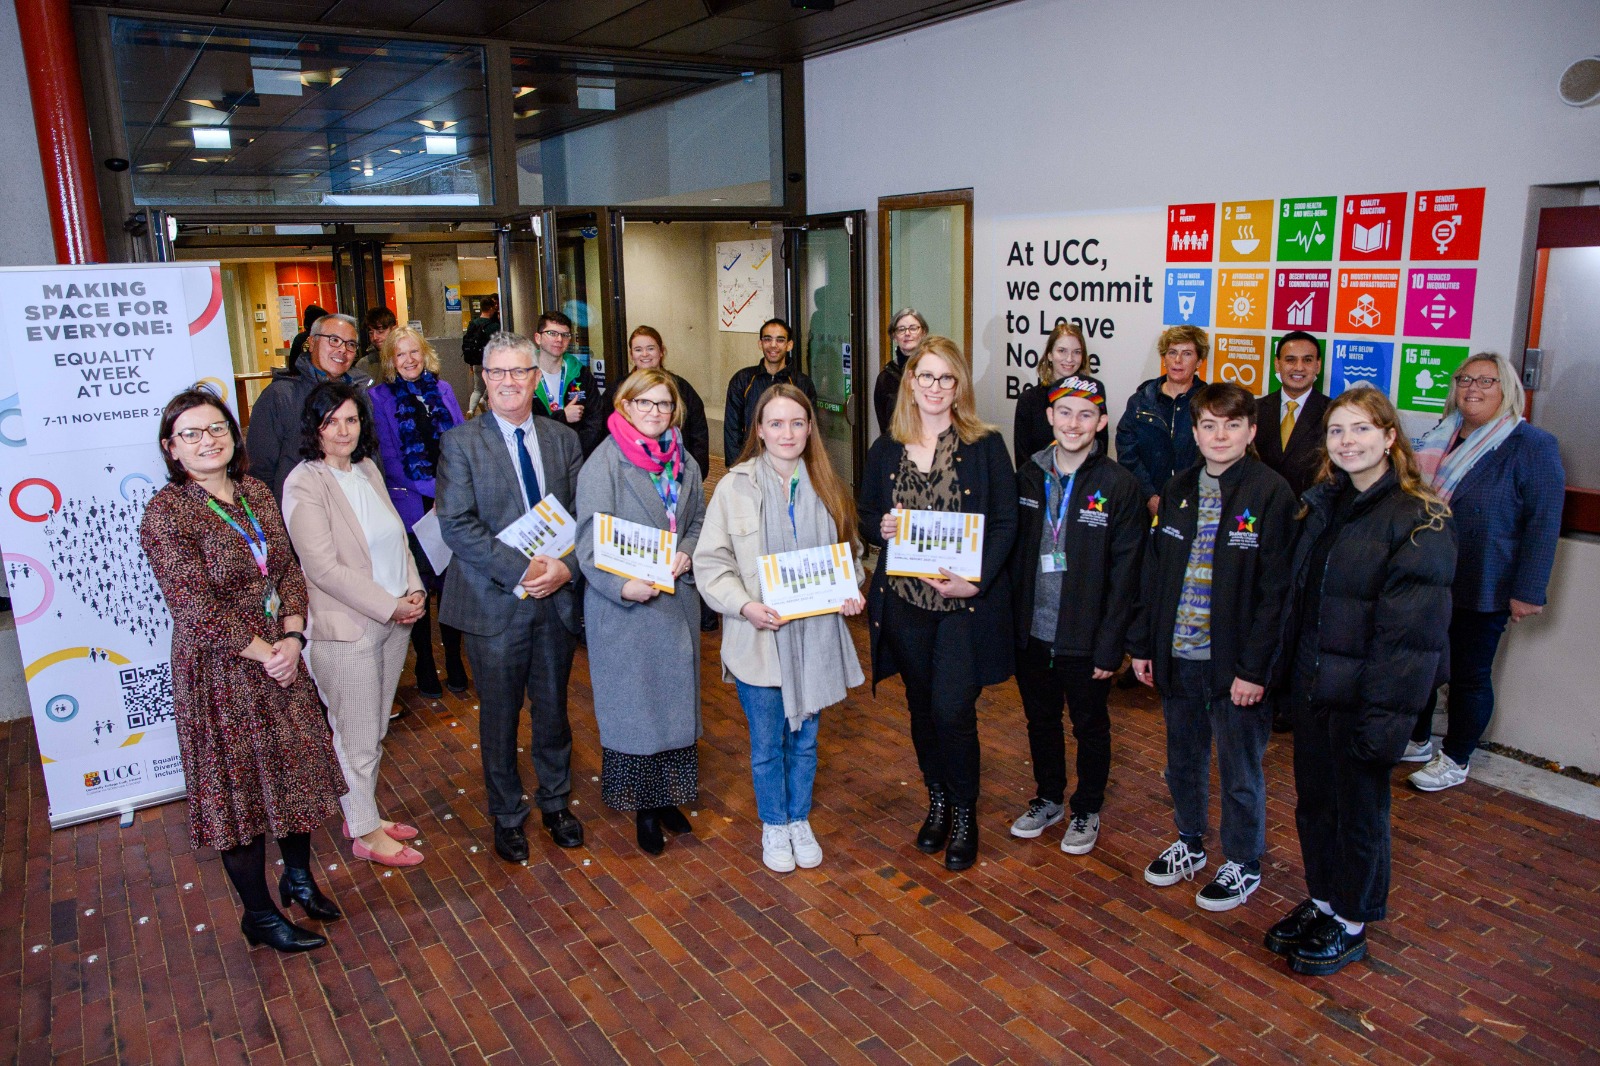 UCC EDI Annual Report 2021-22 Launched as part of Equality Week 